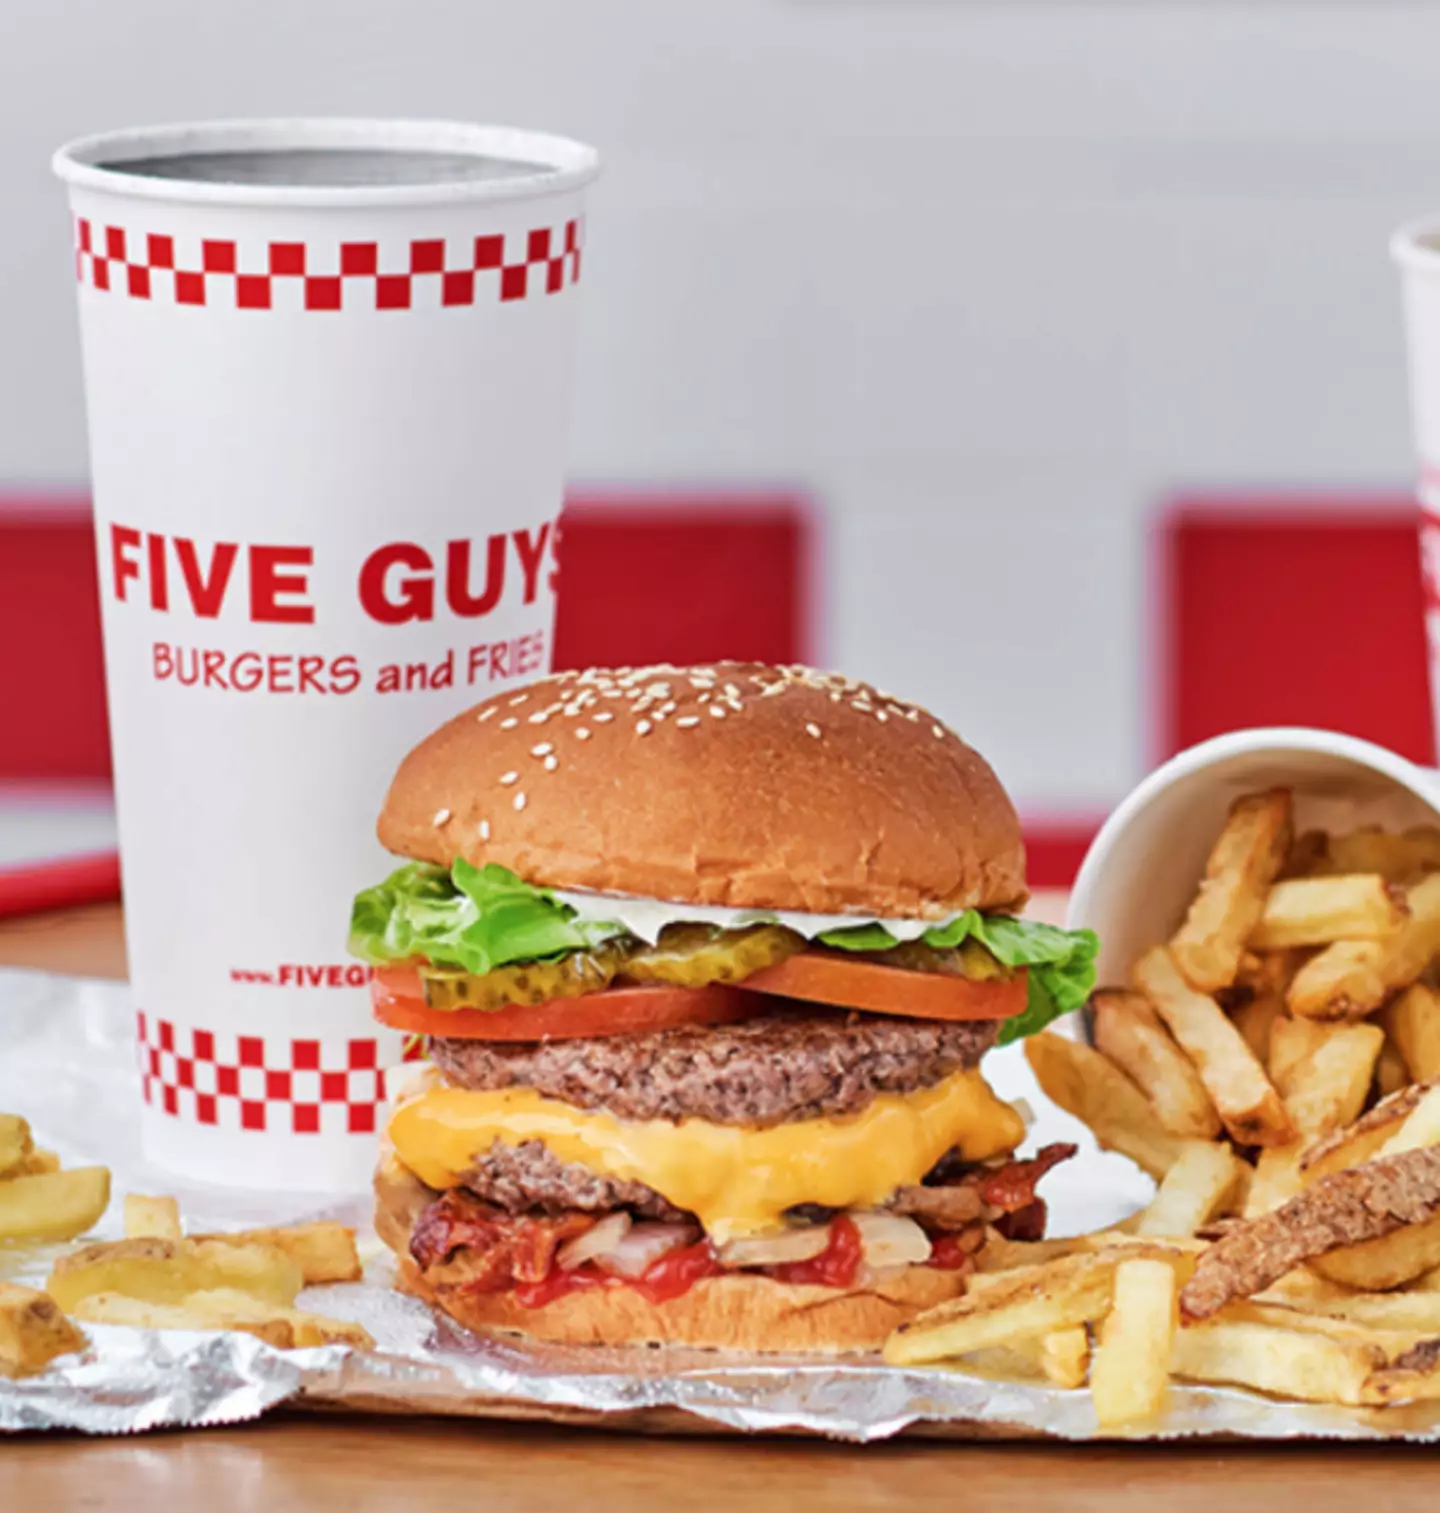 A Five Guys burger can cost up to £12.